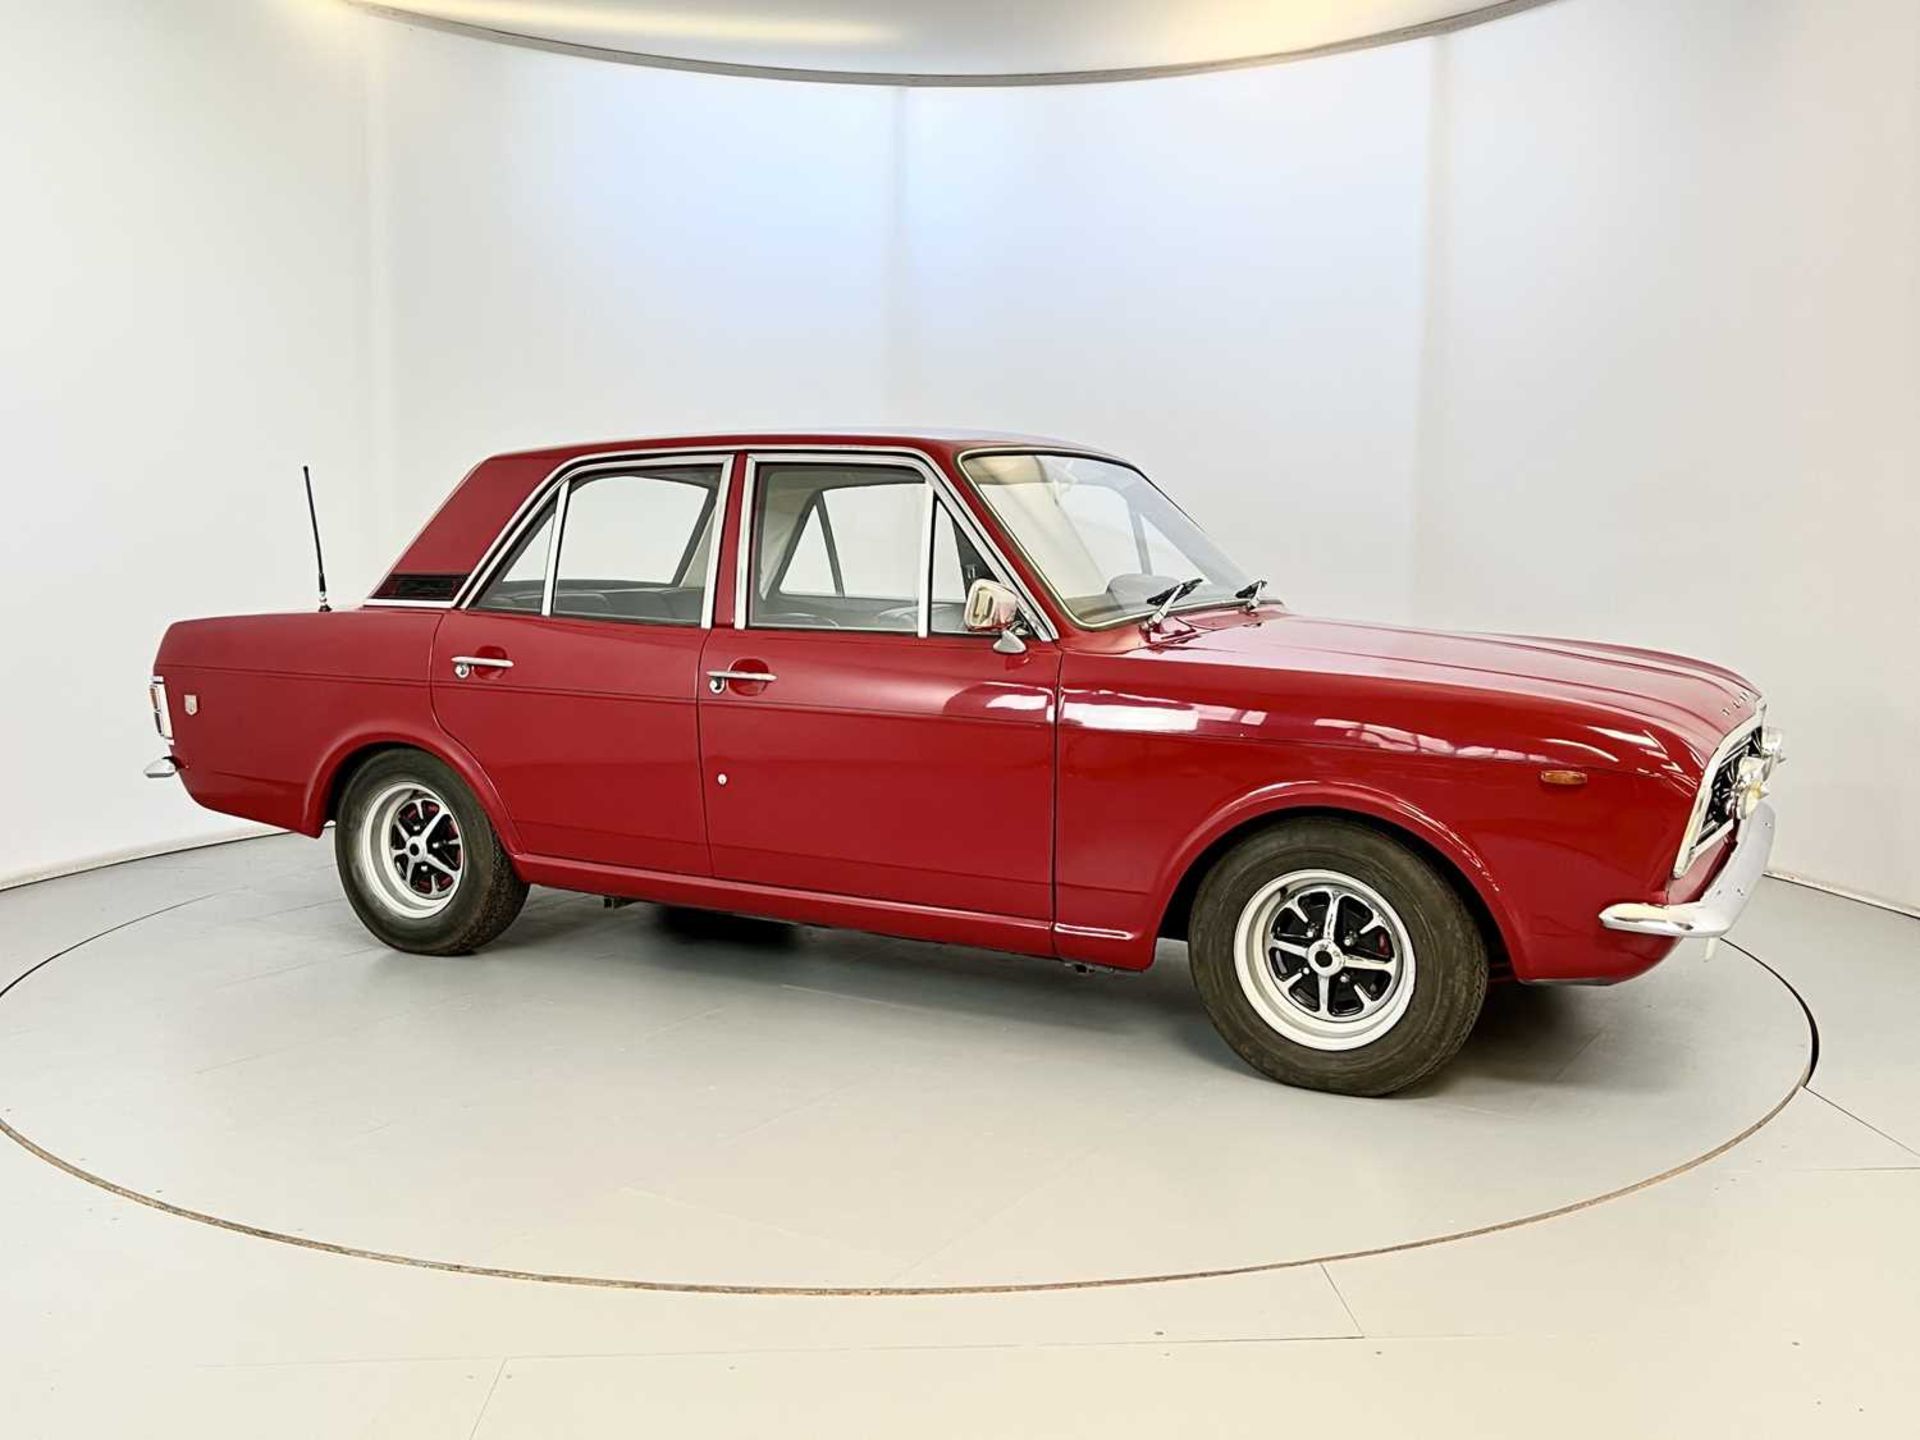 1967 Ford Cortina 1600GT - Image 12 of 37